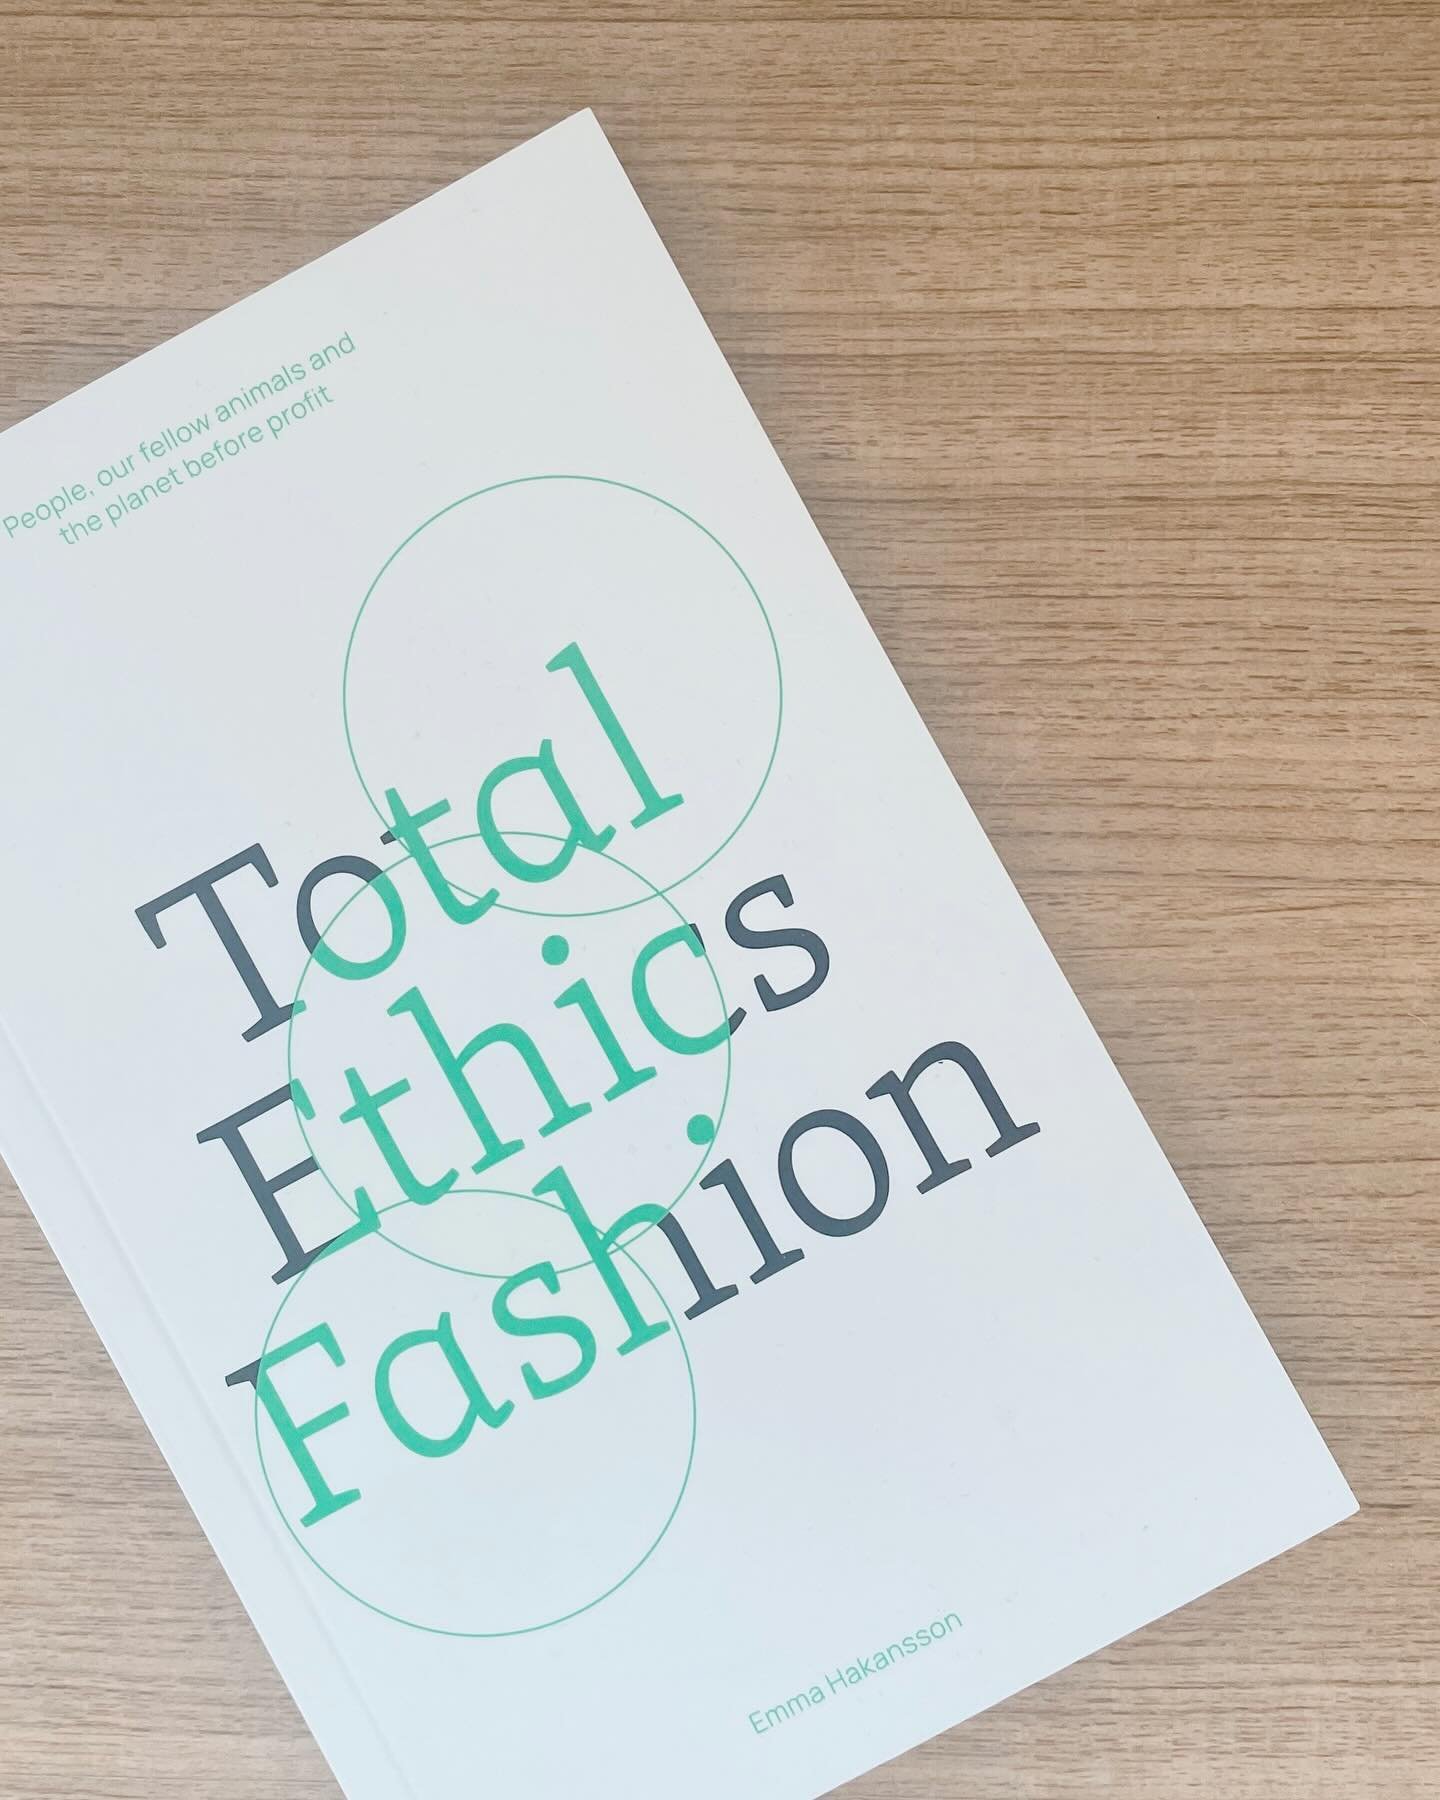 Excited to get stuck into this gem of a book by @hakamme @collectivefashionjustice 

#totalfashionethics #ethicalfashion 
#sustainability #sustainablefashion #ethicalsourcing #traceability #transparency #responsiblebusiness
#responsiblefashion
#susta